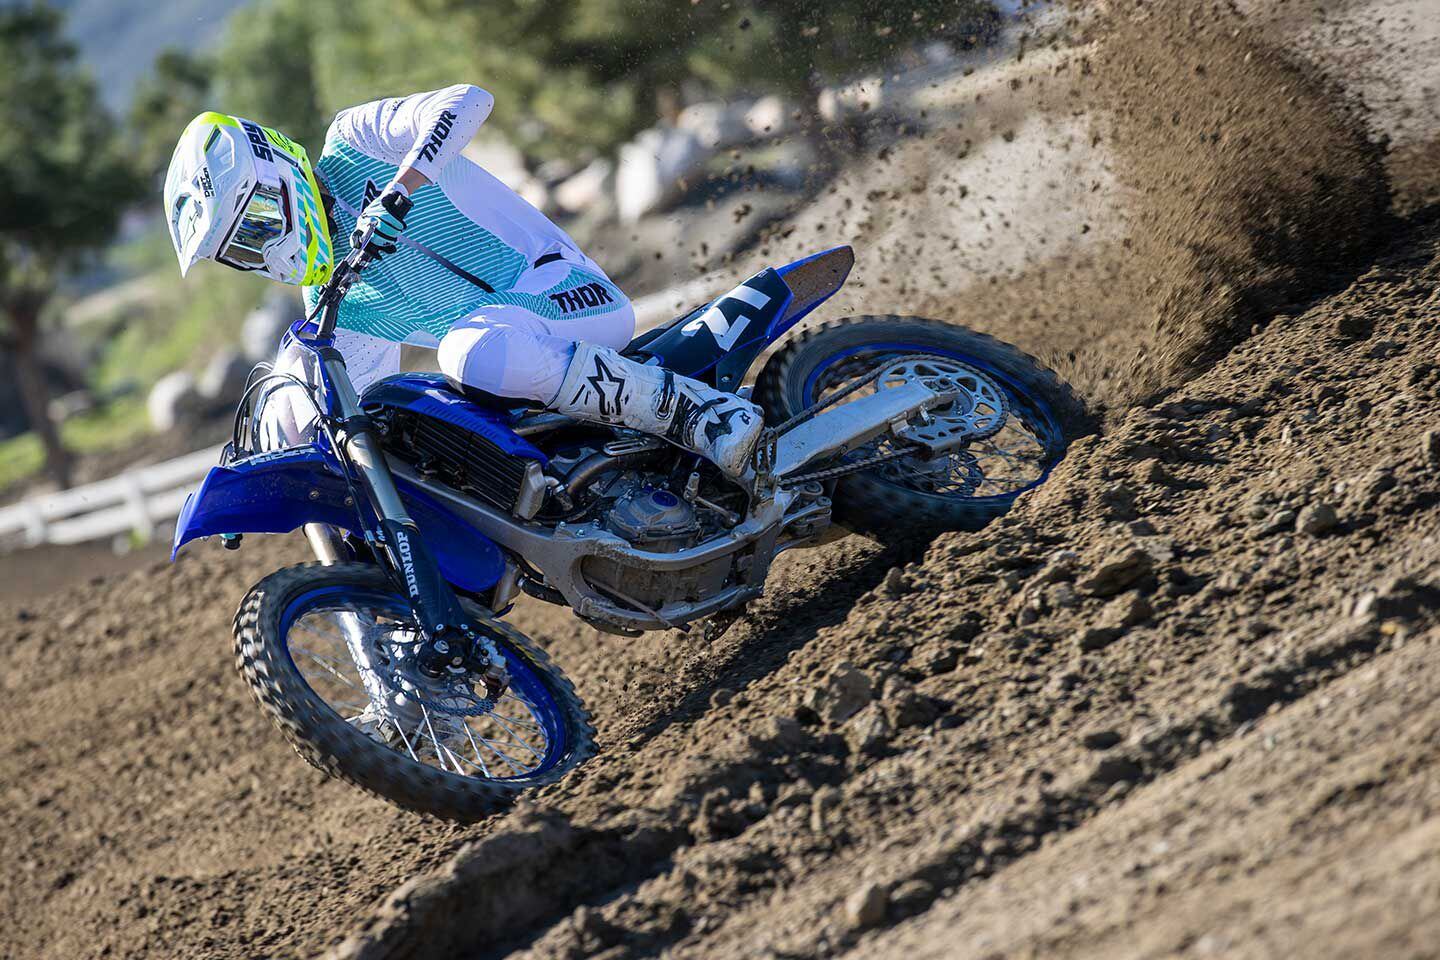 “I felt a substantial amount of torque from the YZ250F engine and noticed gears seem shorter with how quickly it hits the rev limiter. For racing, this is by far one of the best engine packages around and very hard to beat for the price.” <i>—Michael Wicker</i>